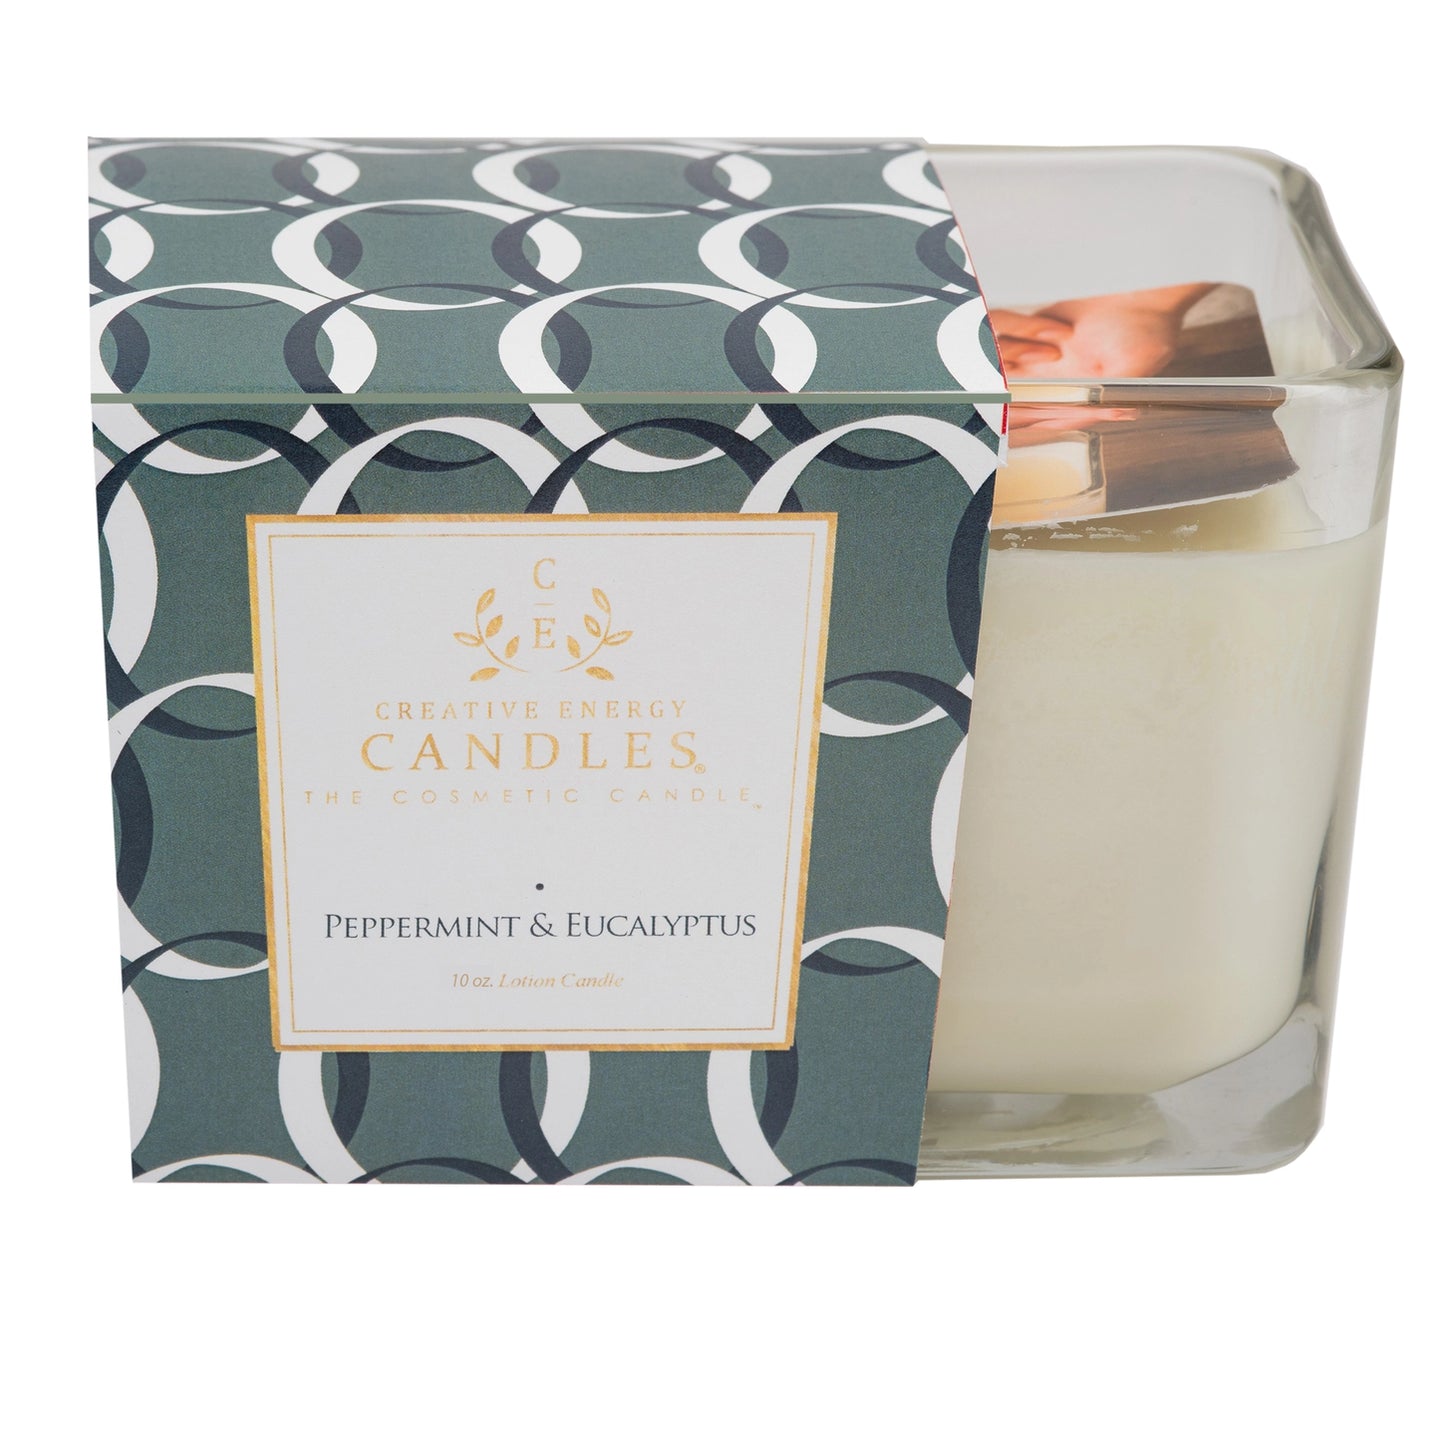 Peppermint & Eucalyptus: 2-in-1 Soy Lotion Candle Large 10 oz